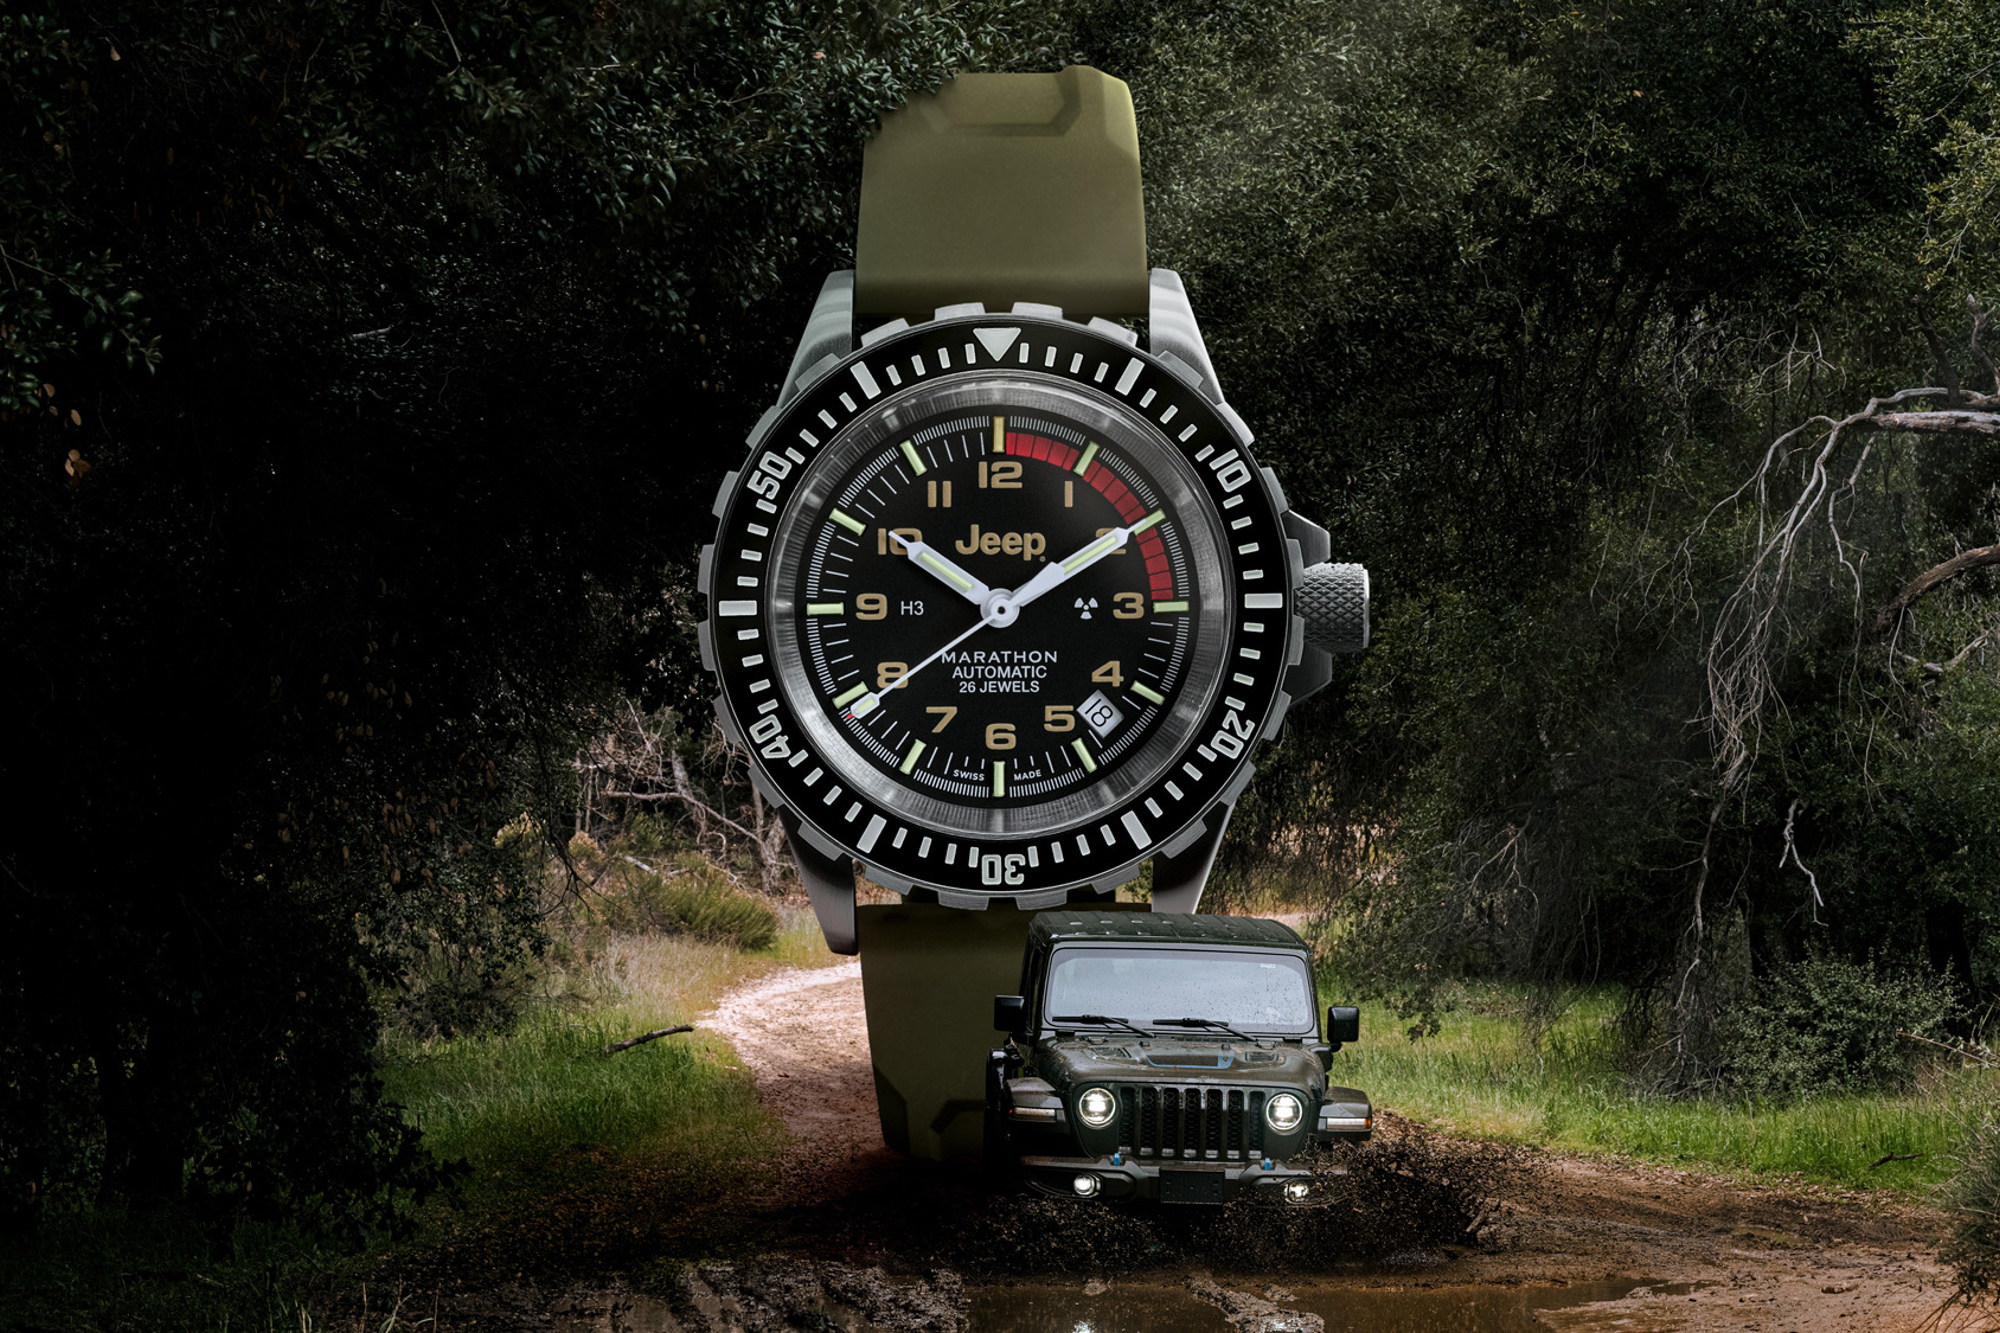 Jeep and Marathon Watch collection launch image with a watch in the center and a Jeep driving on a muddy dirt road.